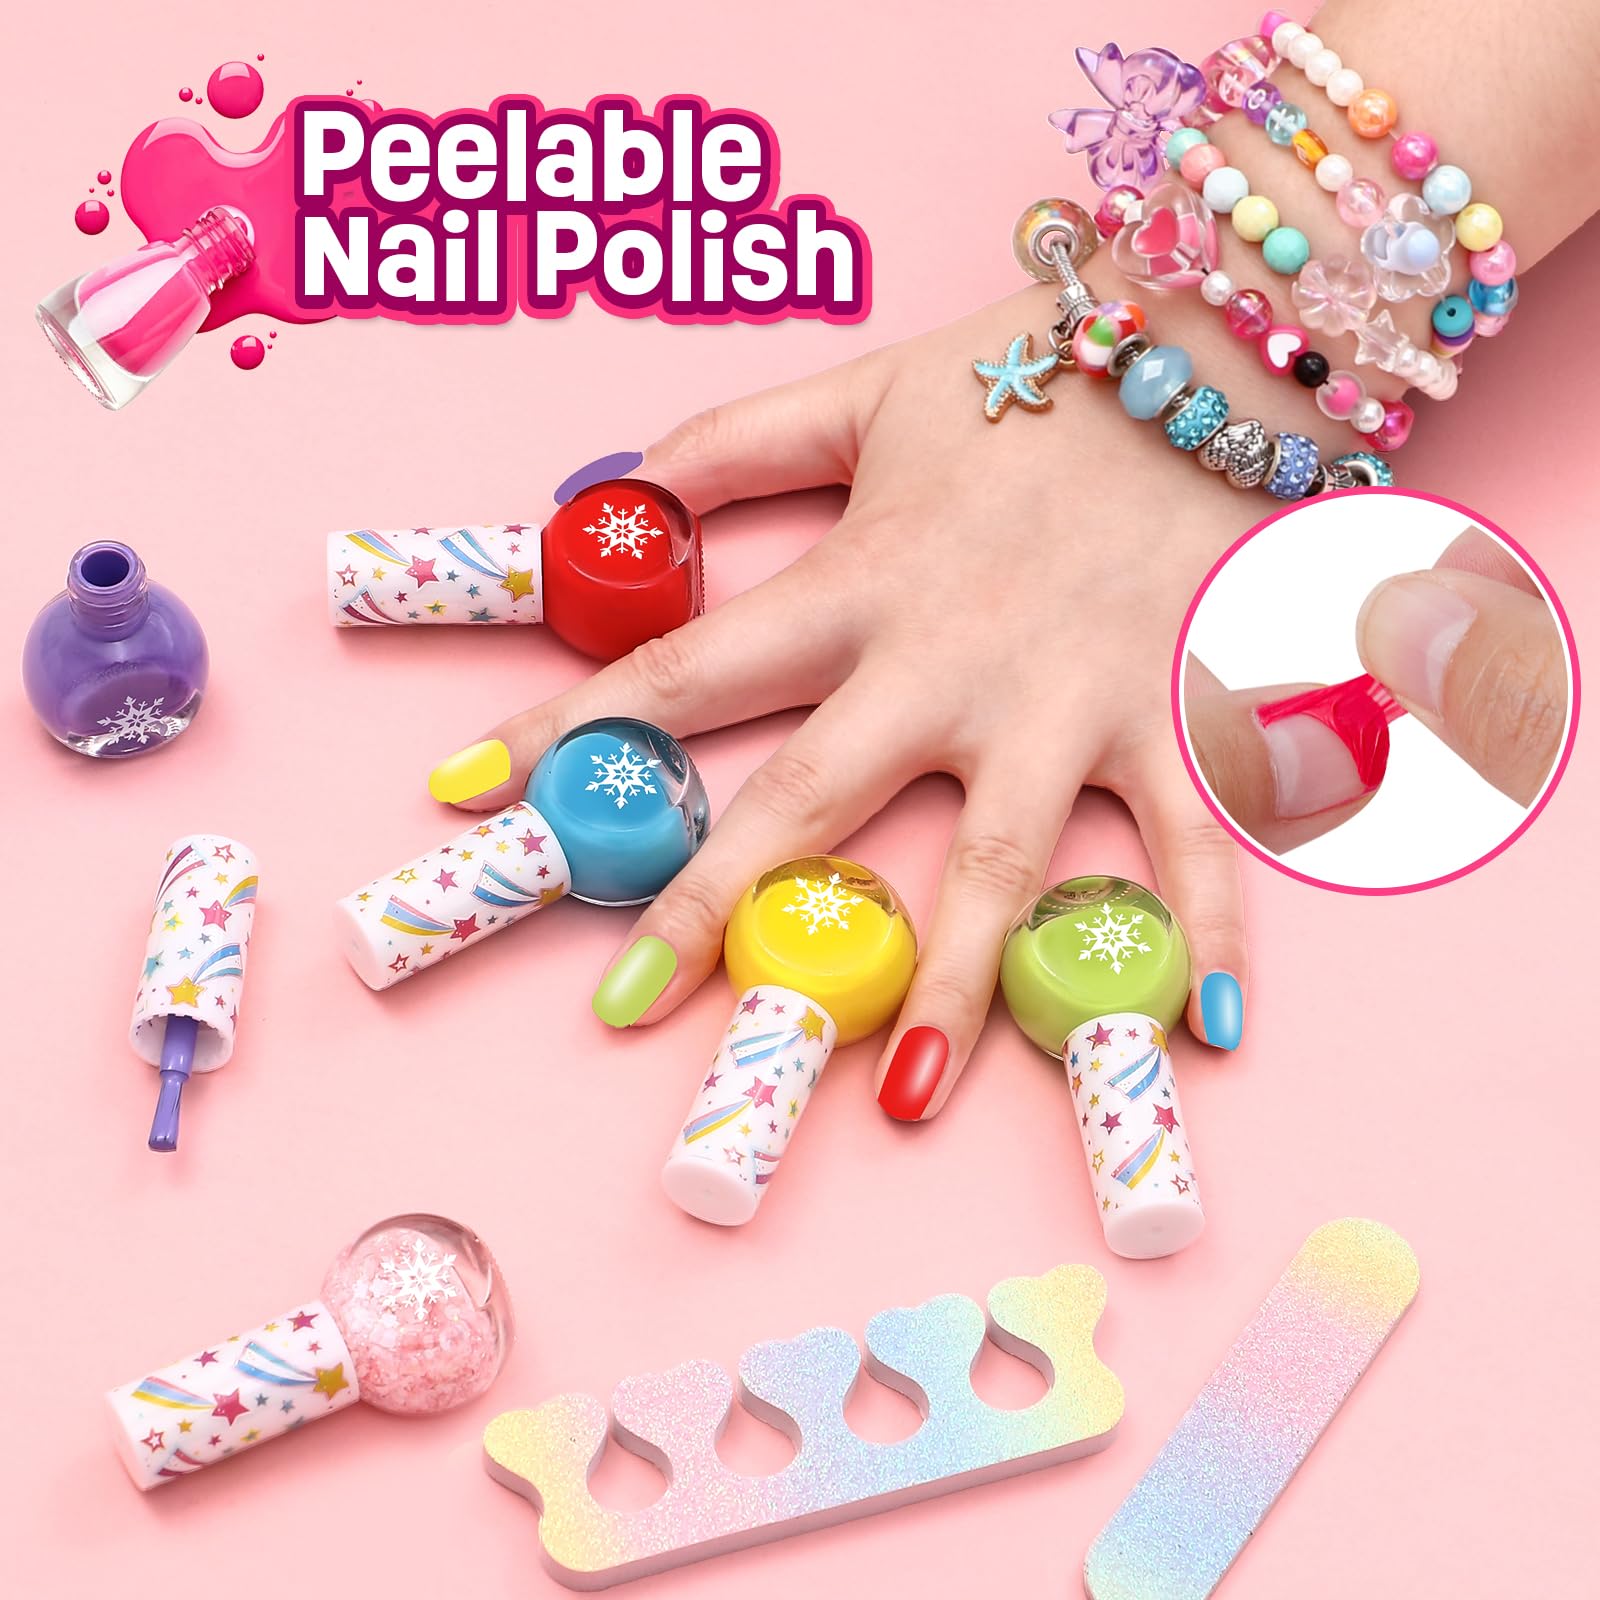 Buy G.C 1500+pcs Bracelet Making Kit for Girls Gifts Toys 5-12 Years Old,  Jewelry DIY Craft Art Supplies & Nail Polish Kit & Jewelry Box with Bead  Charm, Christmas Birthday Gift Girl